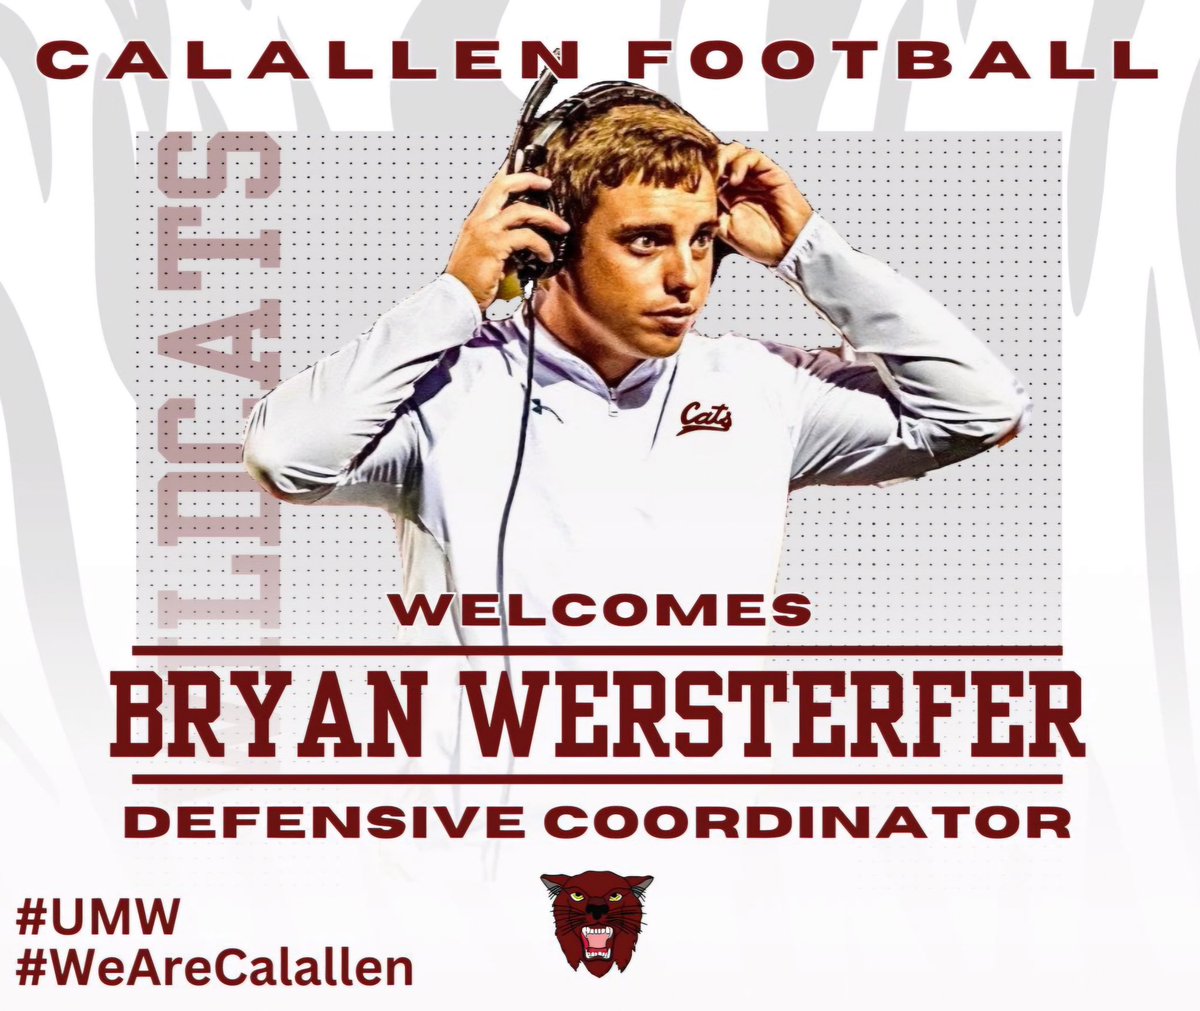 Excited to introduce our new defensive coordinator to Calallen! Wildcats, please welcome Coach Bryan Wersterfer 🐾
✅ 2023 State Finalist
✅ Top 5 Defense 5A Div 1
✅ Former College Triathlete 
✅ South Texas Native